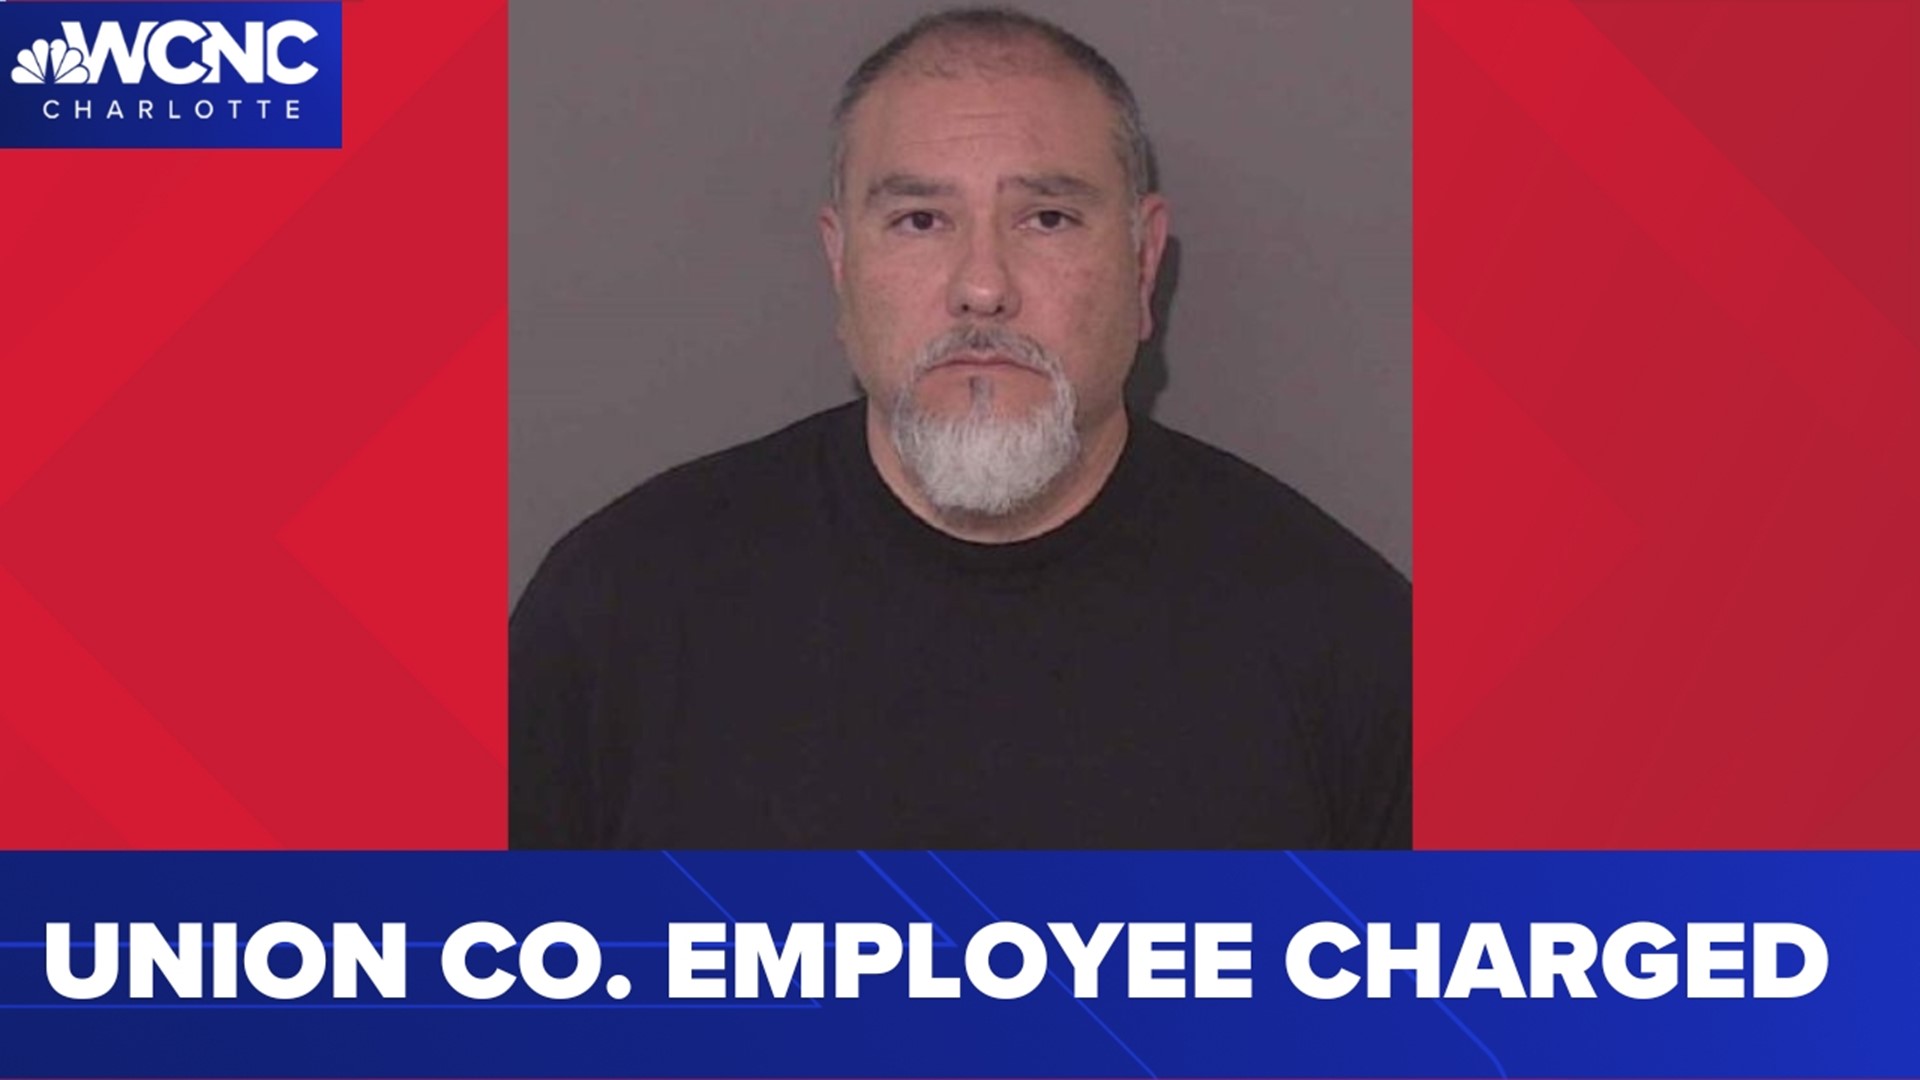 A county employee has been arrested and charged with sexual exploitation of a minor.